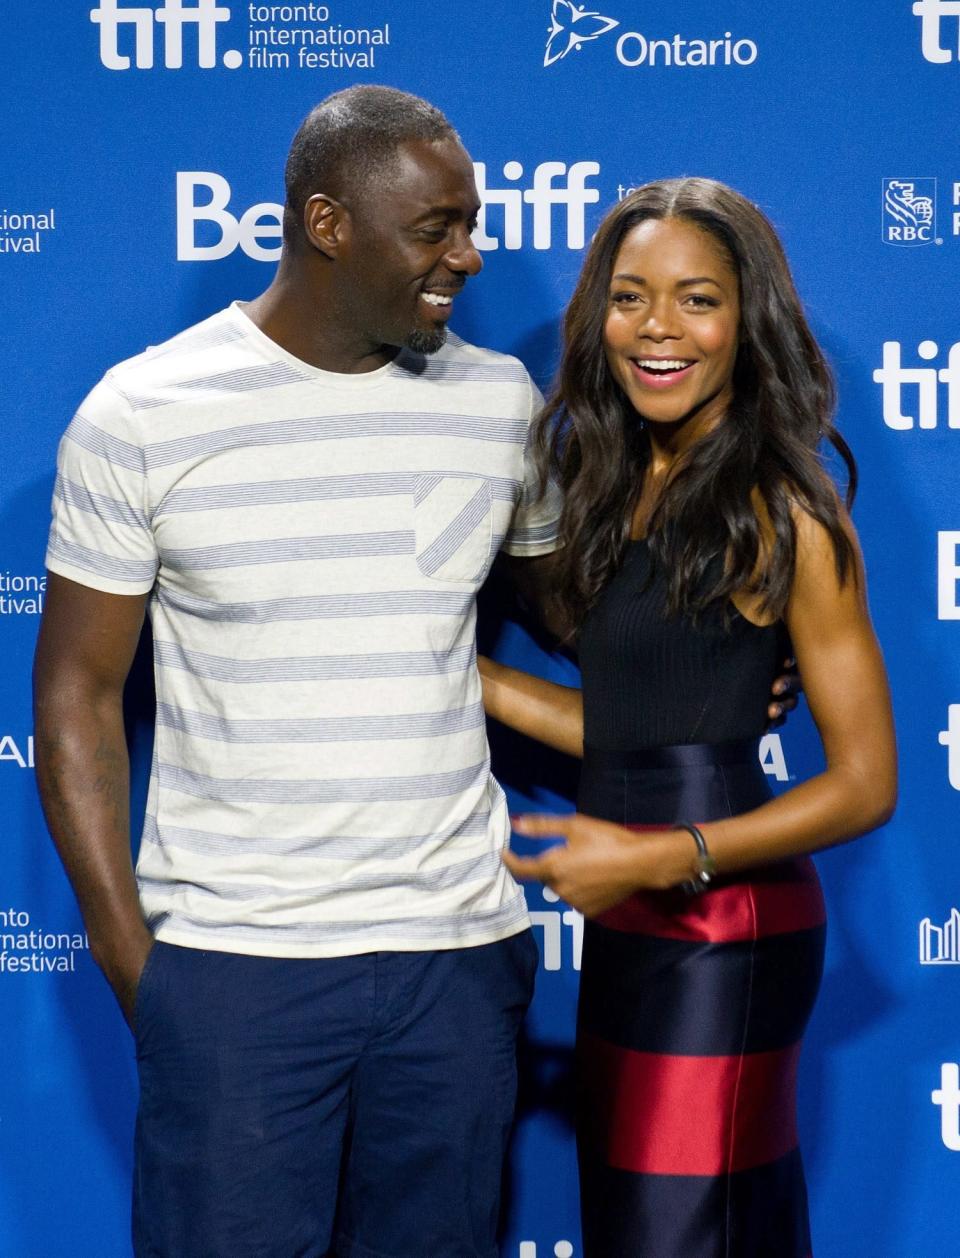 Actors Idris Elba, left, and Naomie Harris pose for a picture during the photo call for "Mandela: Long Walk to Freedom" at the 2013 Toronto International Film Festival in Toronto on Sunday, Sept. 8, 2013. (AP Photo/The Canadian Press, Galit Rodan)